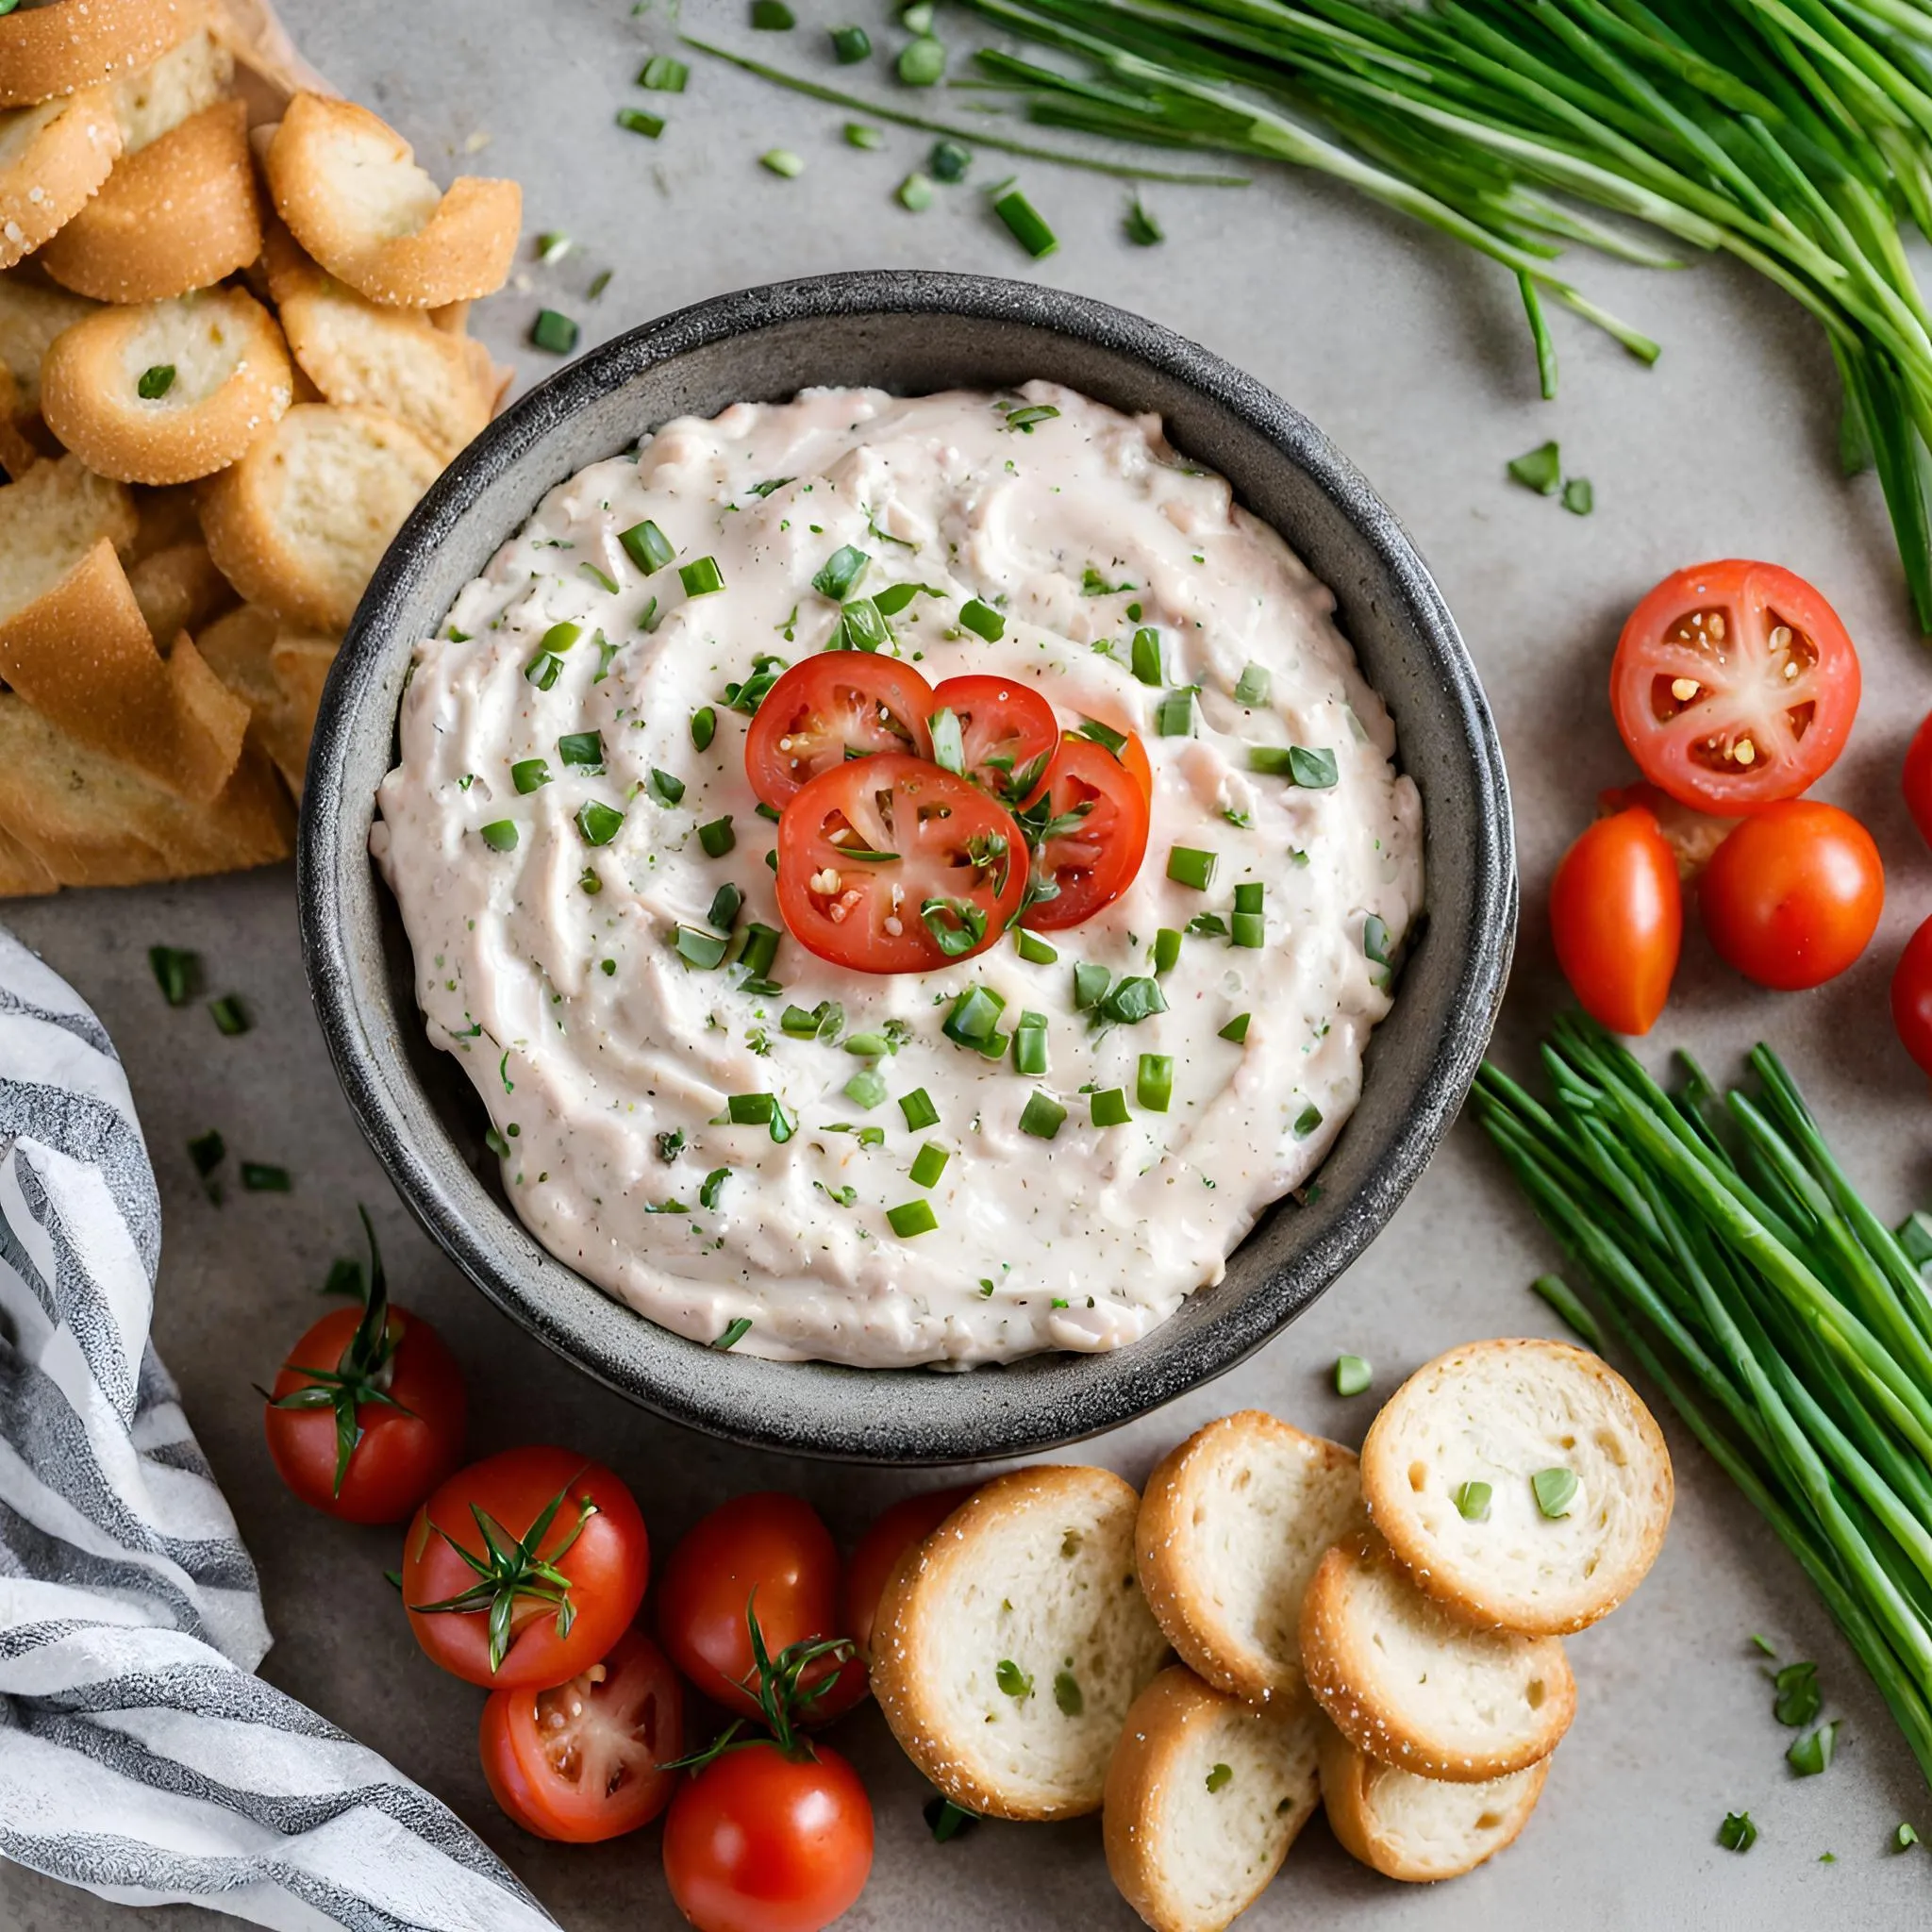 A bowl of bagel dip surrounded by vegetables and crackers on a table.